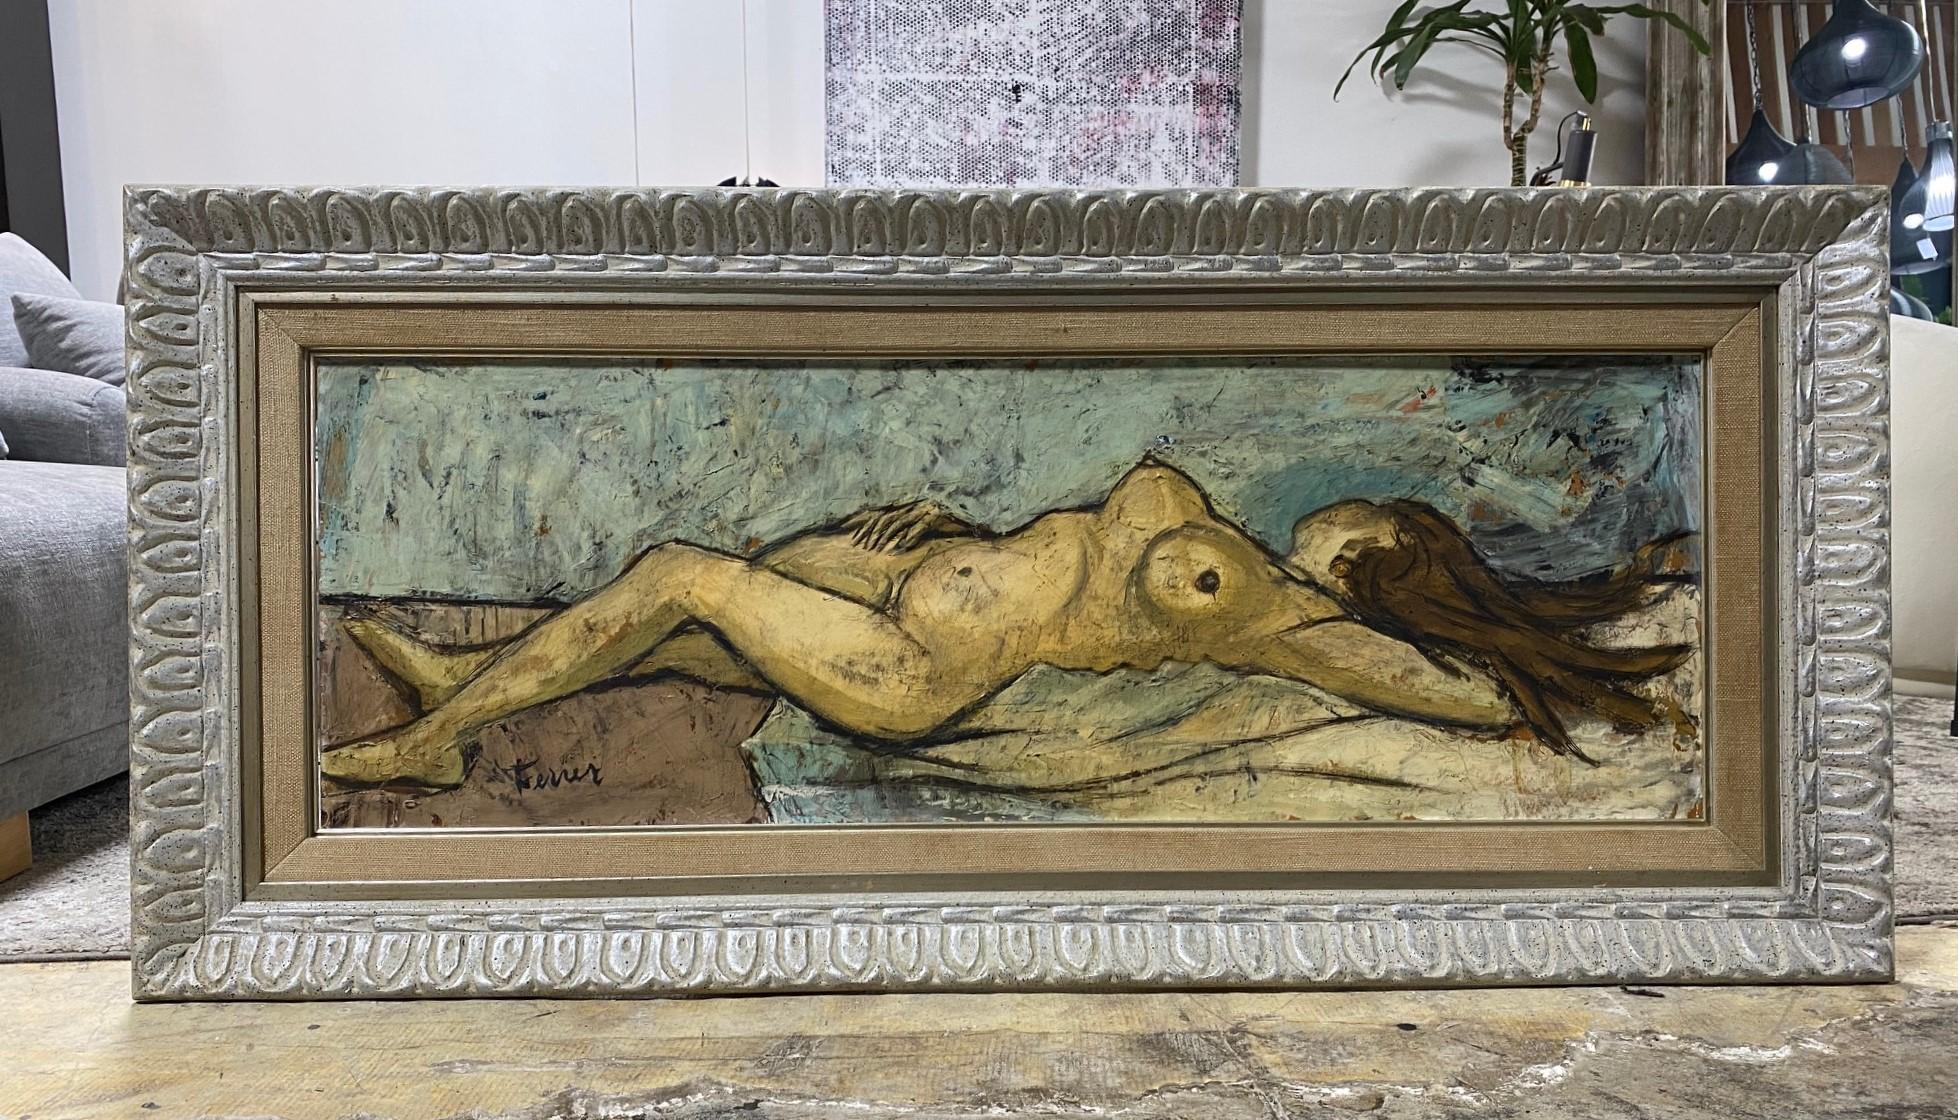 A beautiful, engaging, and somewhat rare original large oil on board nude painting by French artist Charles Levier (1920-2003). 

Levier was born in 1920 to a French father and an American mother in Corsica. At the age of 17, he studies at the